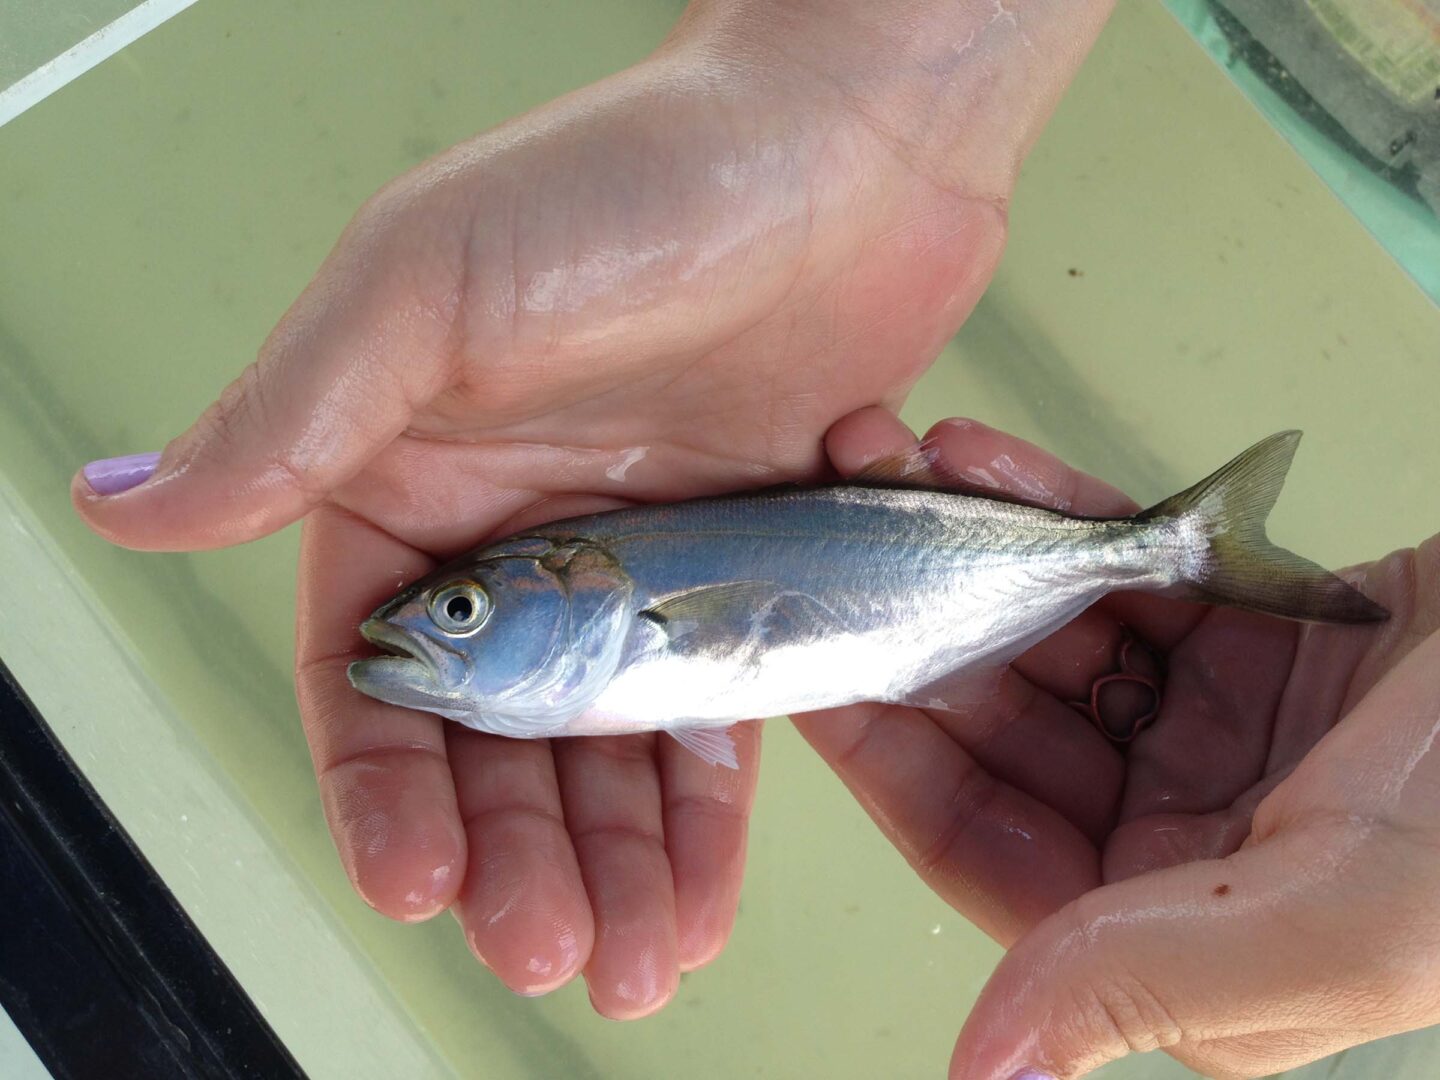 A little fish in the hands of a Park Educator at Hudson River Park